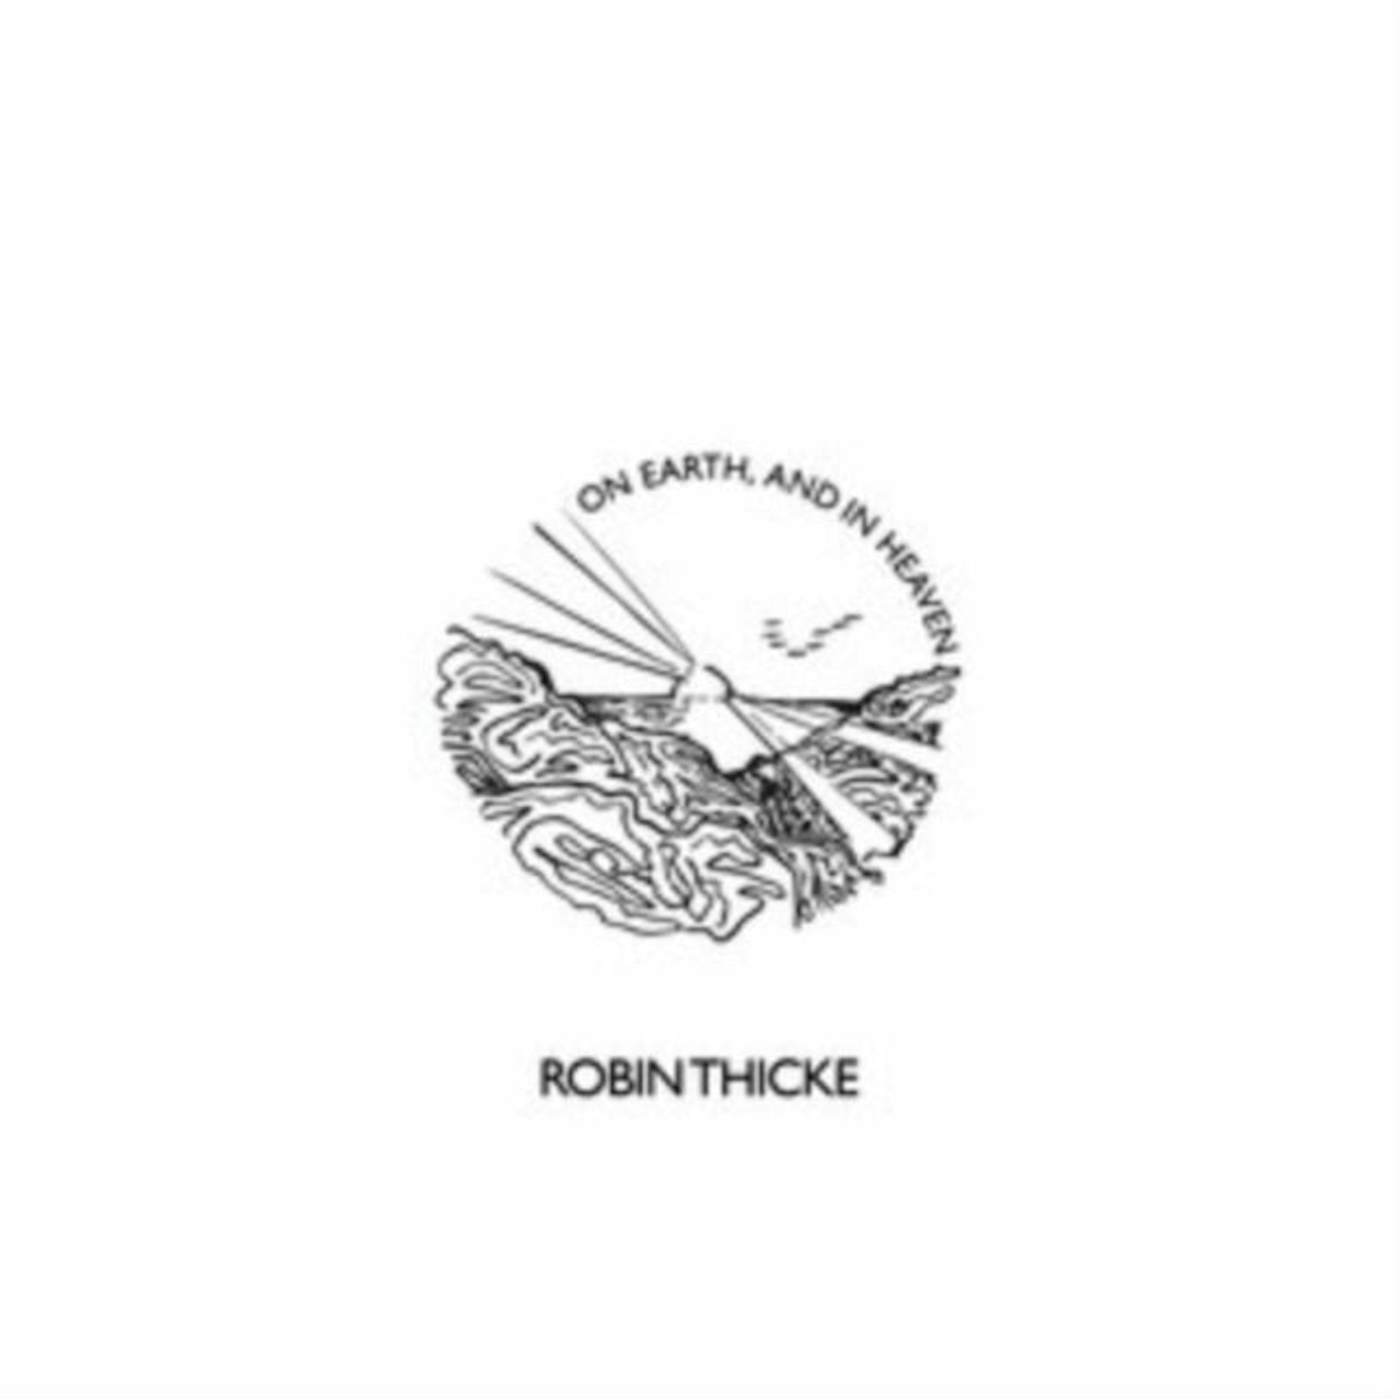 Robin Thicke LP Vinyl Record - On Earth. And In Heaven